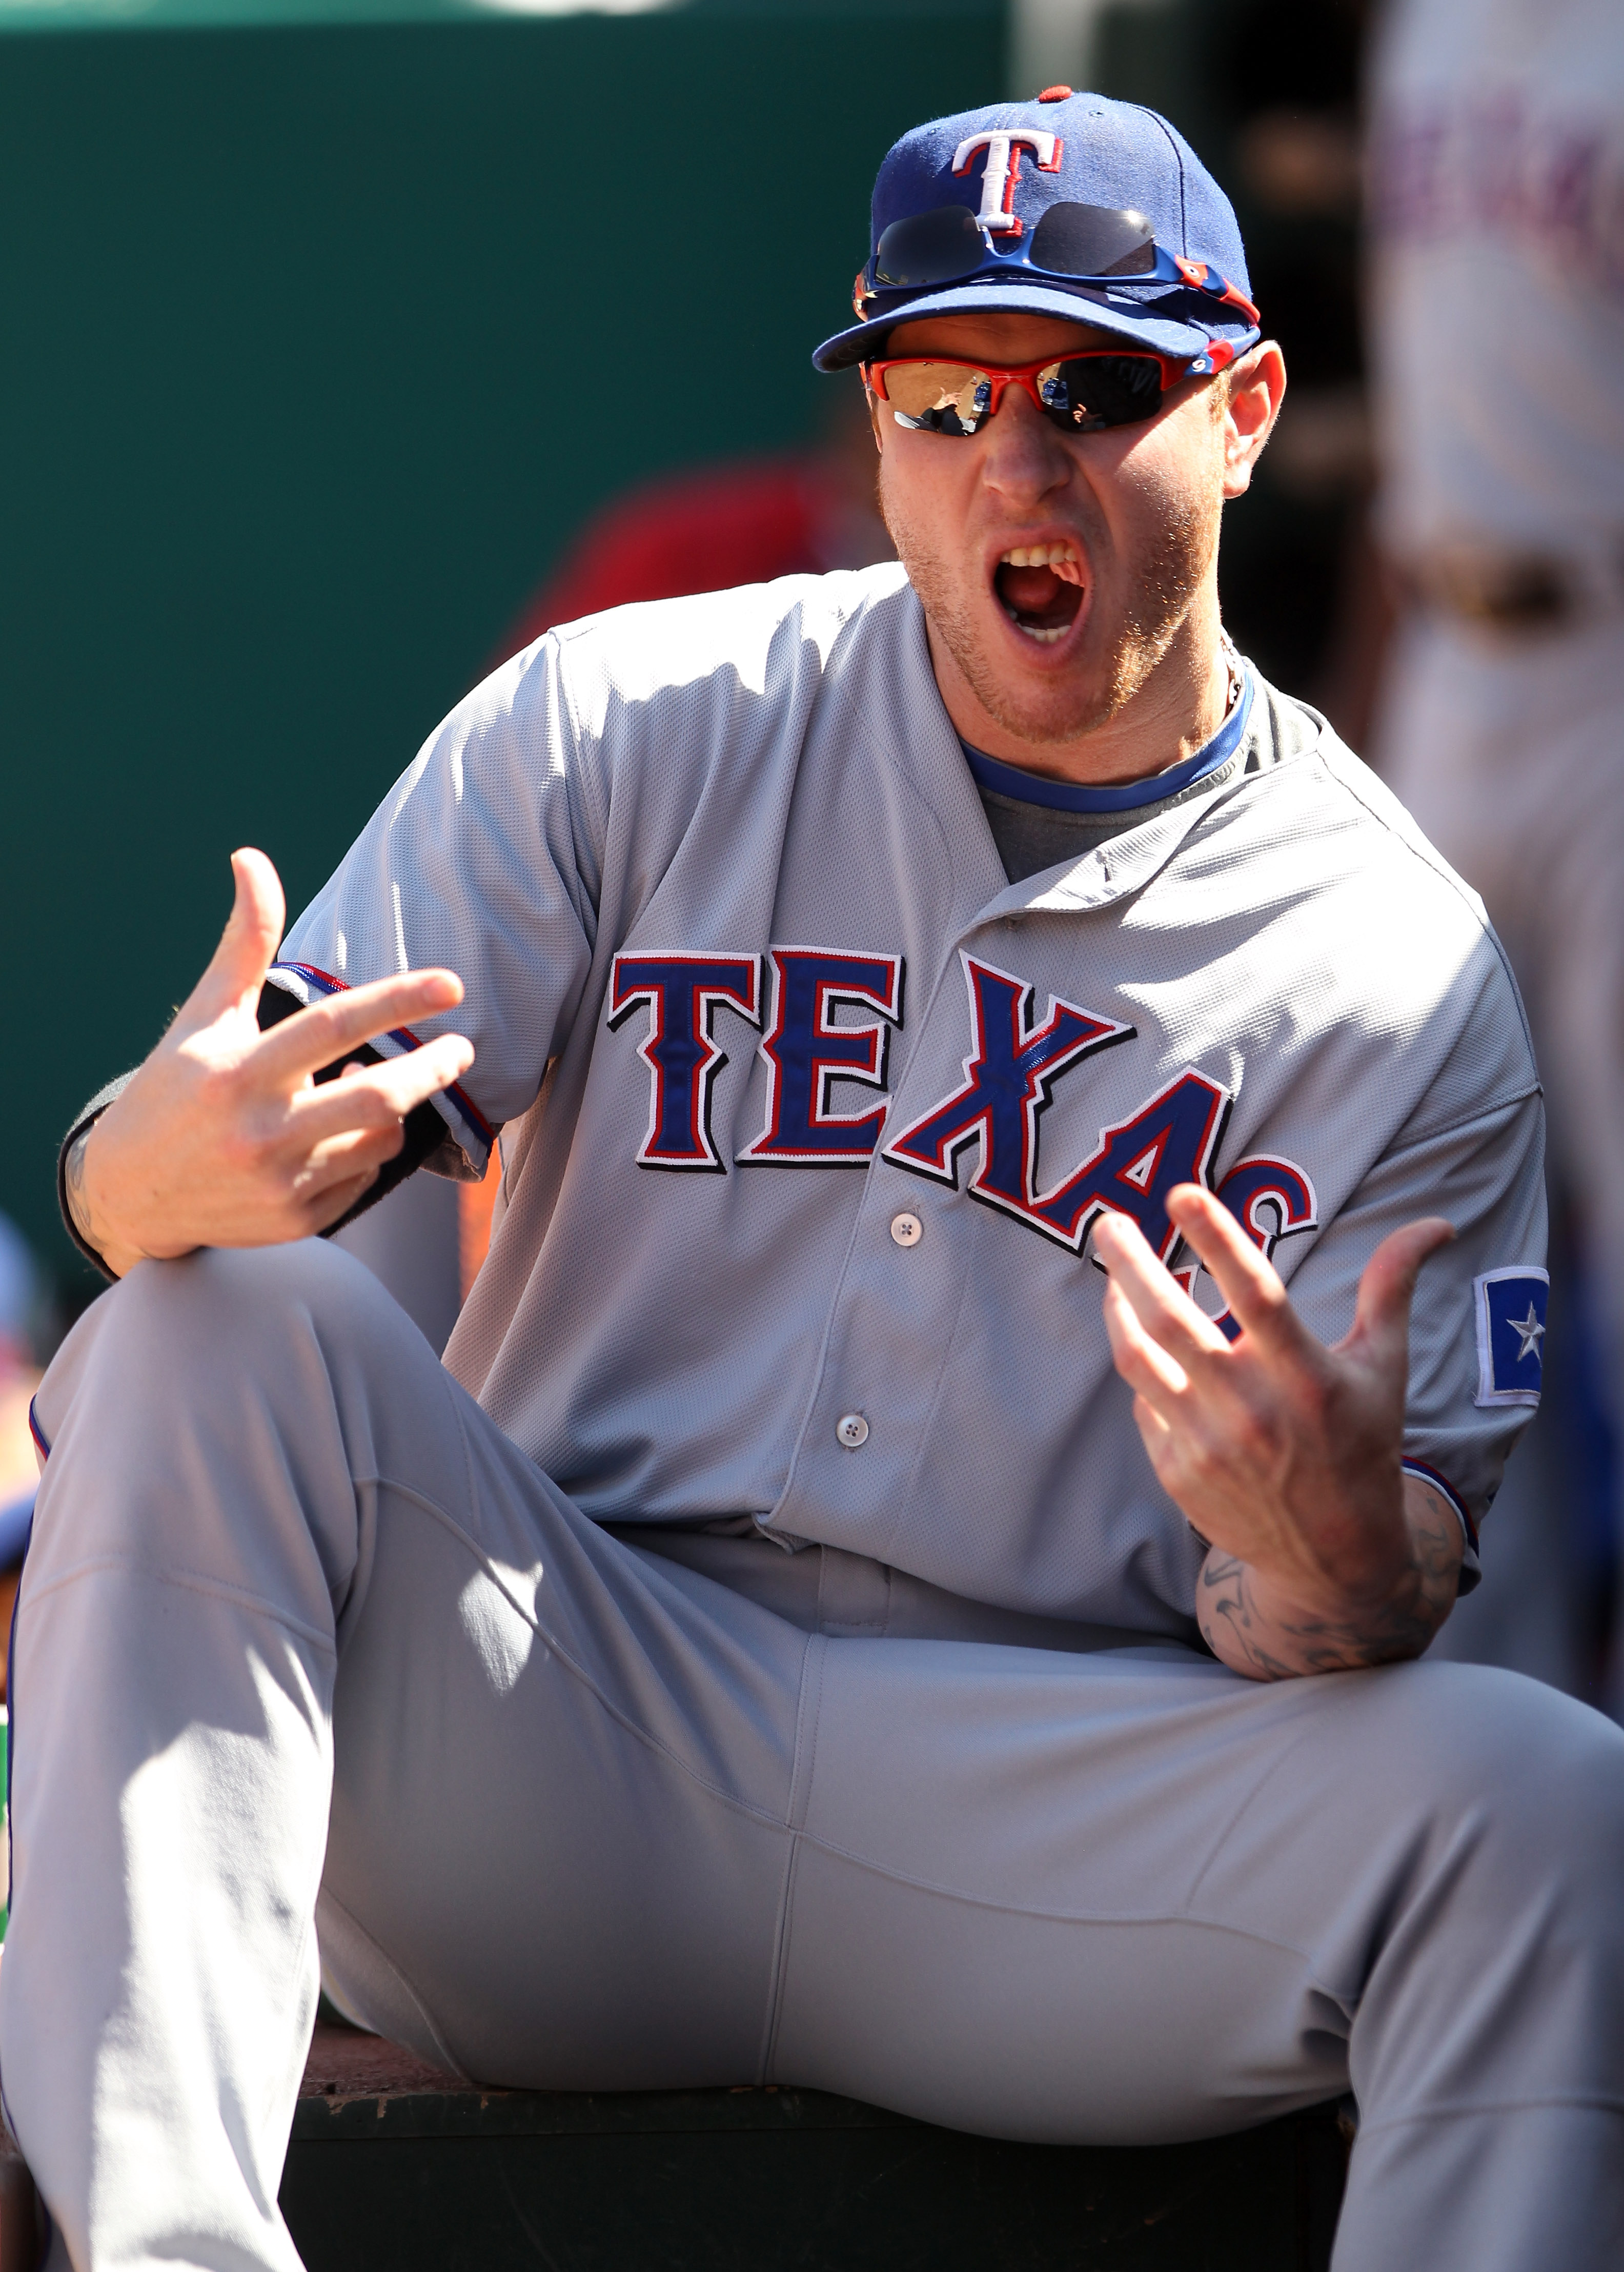 OAKLAND, CA - SEPTEMBER 25:  Josh Hamilton #32 of the Texas Rangers jokes around in the dugout before their game against the Oakland Athletics at the Oakland-Alameda County Coliseum on September 25, 2010 in Oakland, California.  (Photo by Ezra Shaw/Getty 